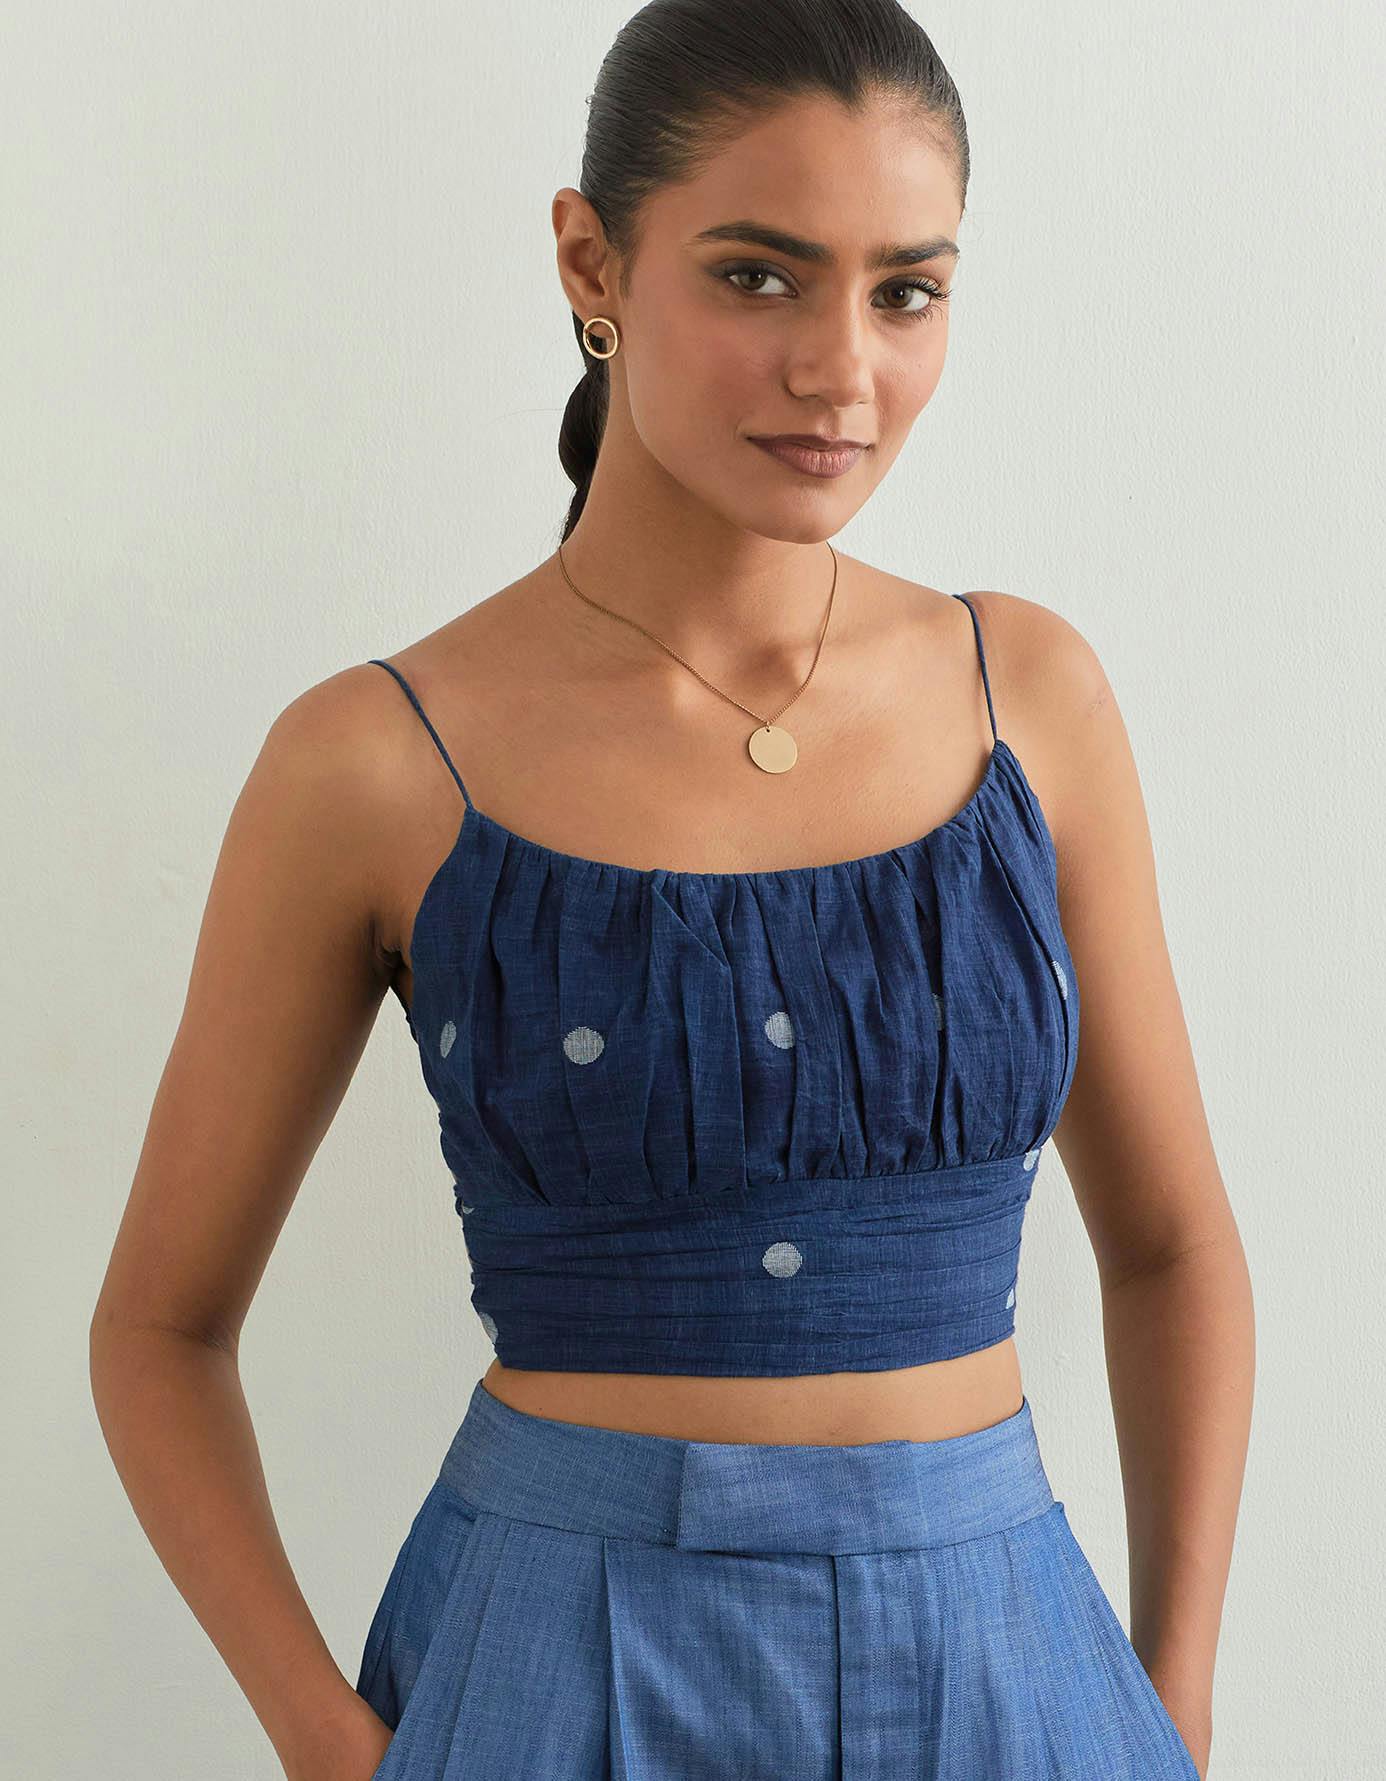 JENNIE TOP in Indigo, a product by SIX BUTTONS DOWN